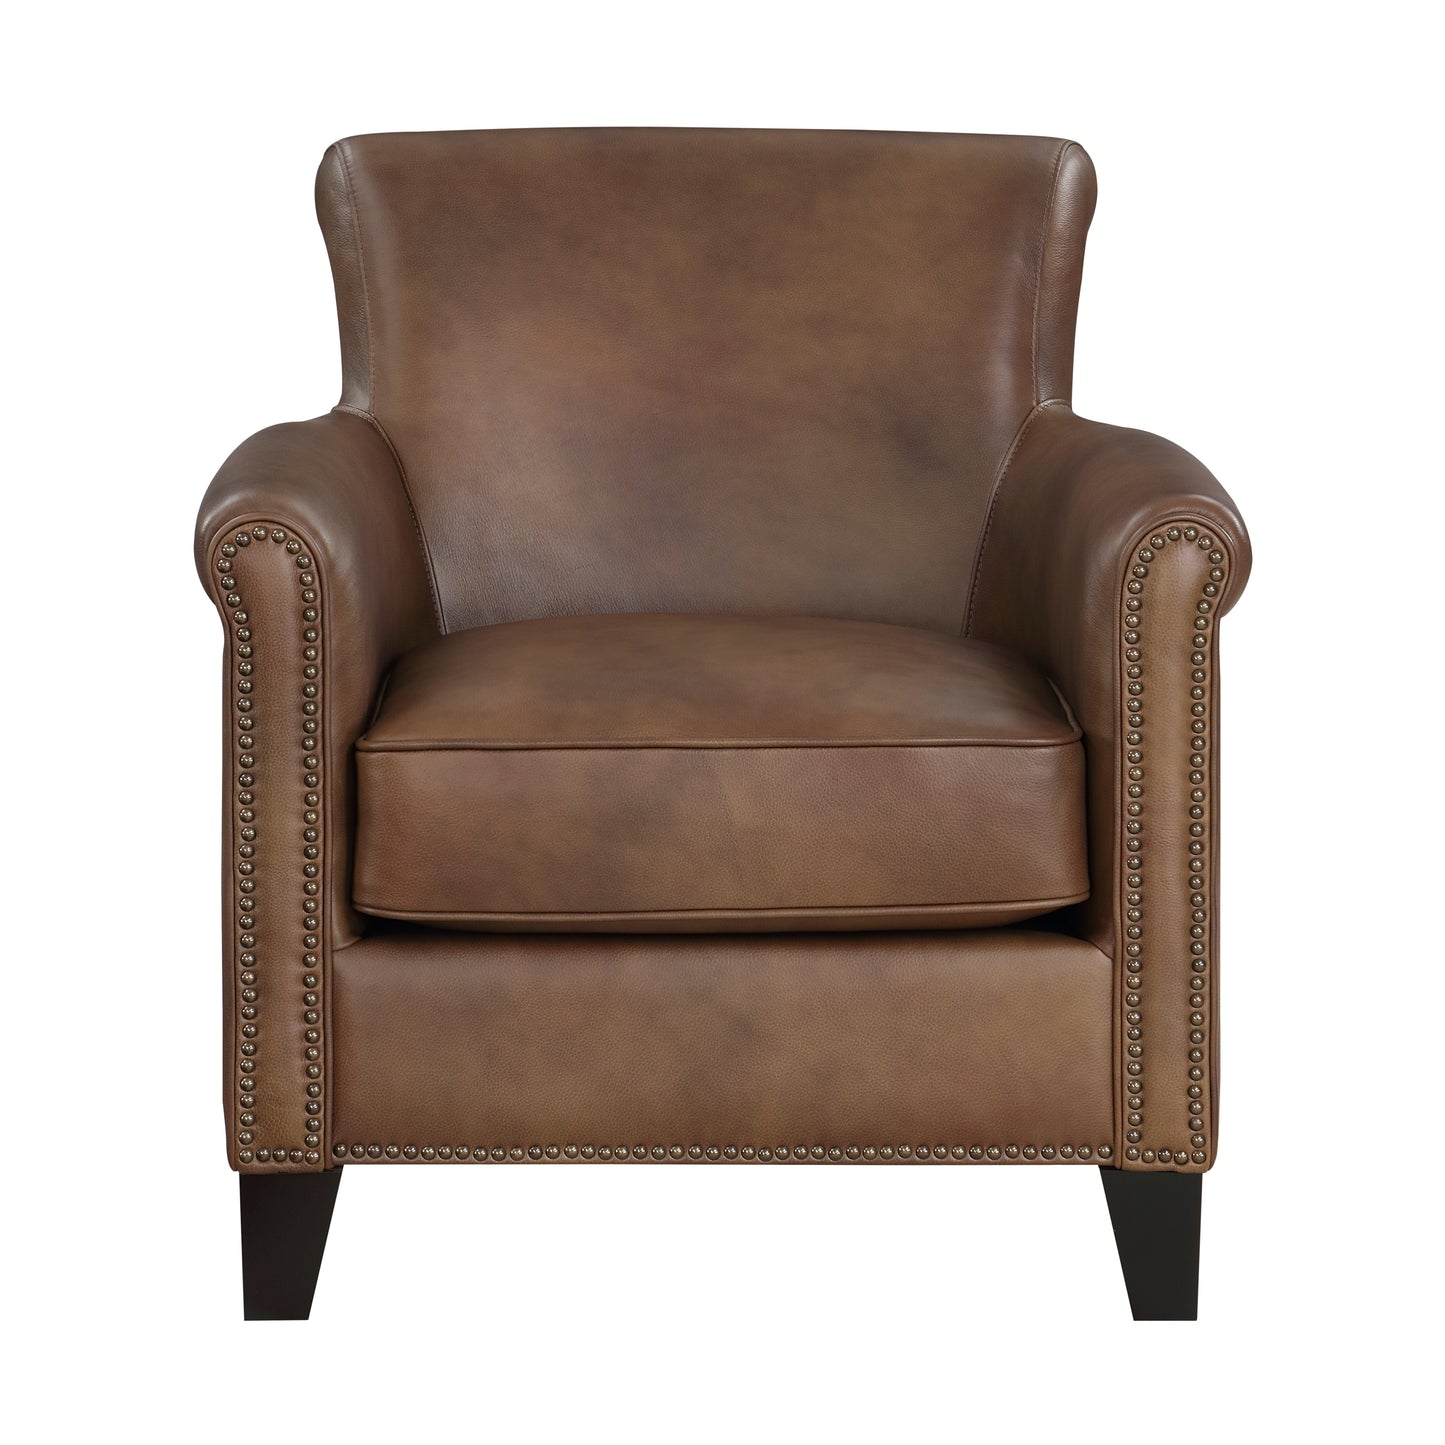 Braintree Top Grain Leather Accent Chair BROWN %100 LEATHER